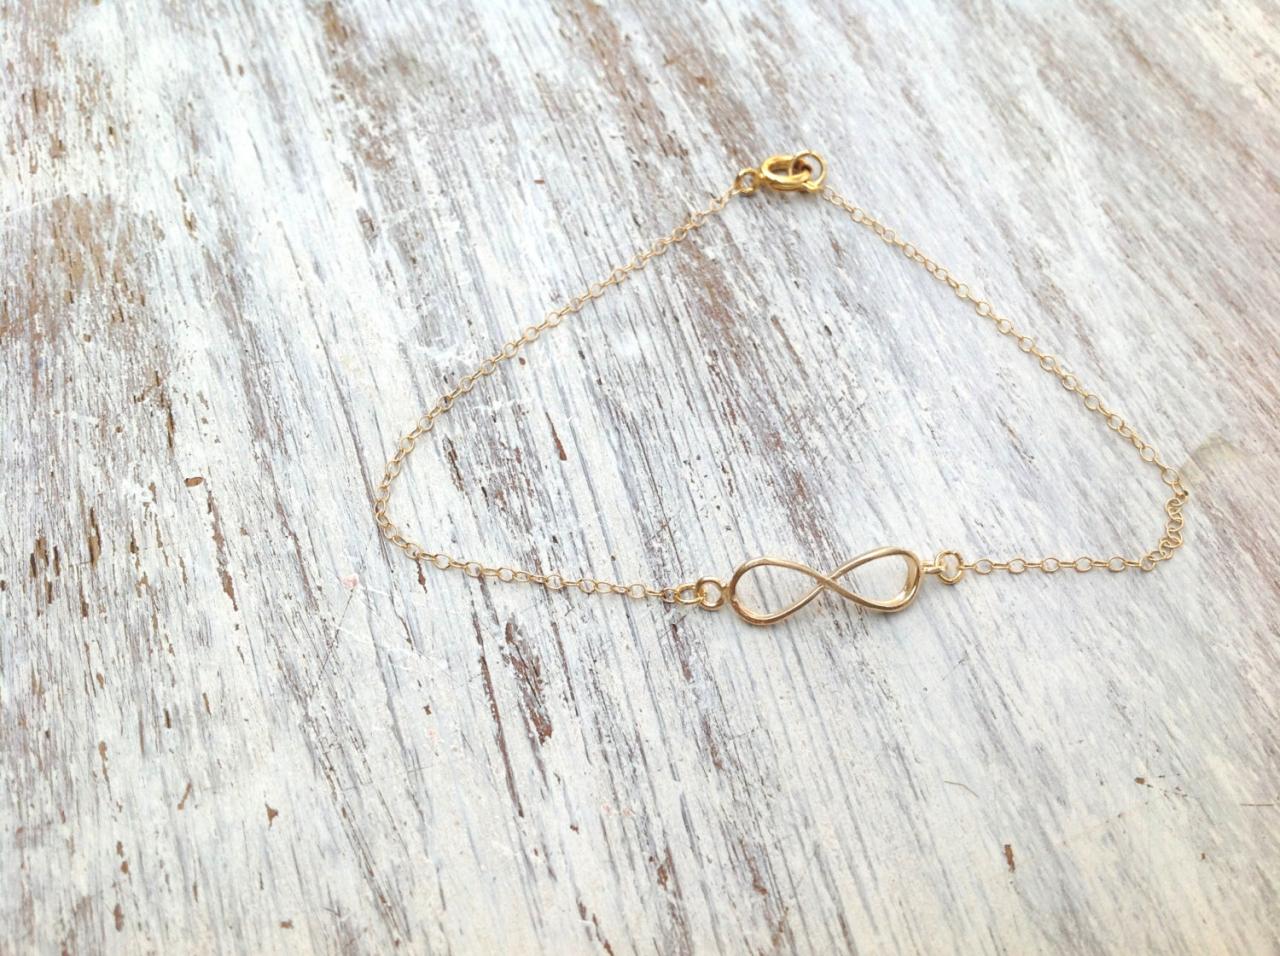 Gold Anklet, Infinity Anklet, Simple, Infinity Jewelry, Delicate Bracelet, Gold Infinity, Goldfilled -520